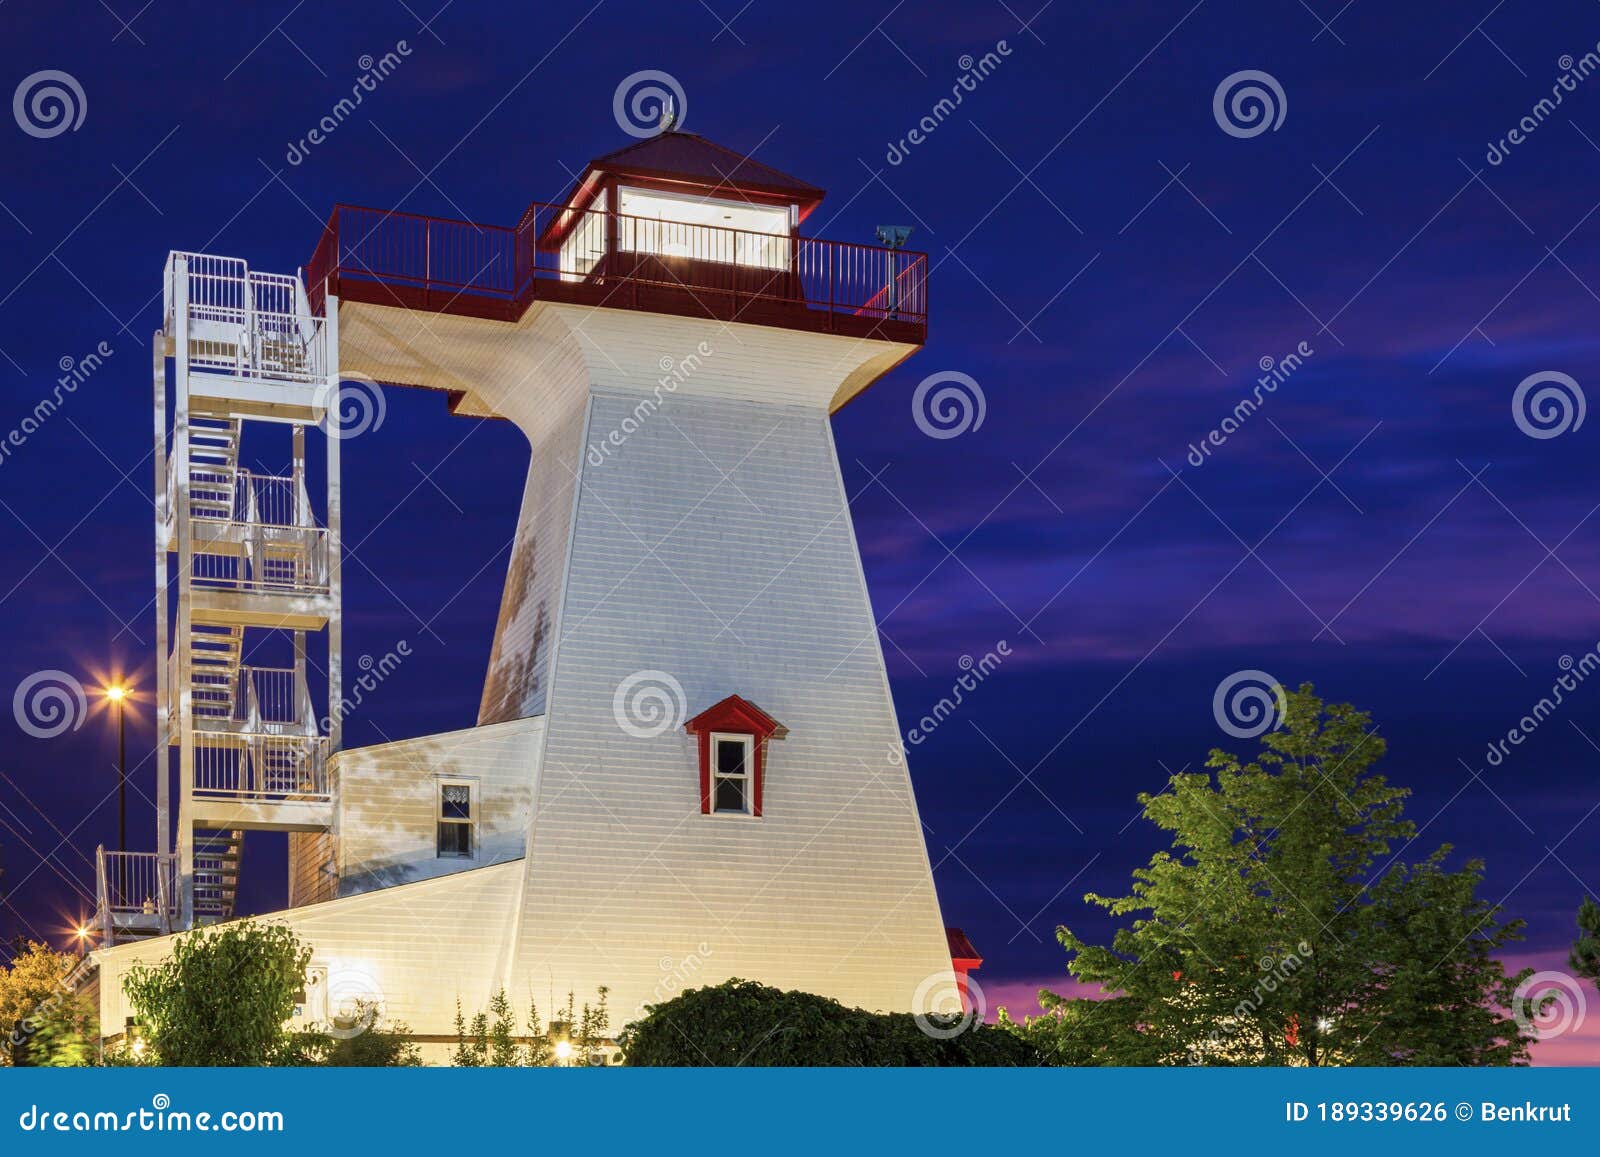 lighthouse in fredericton